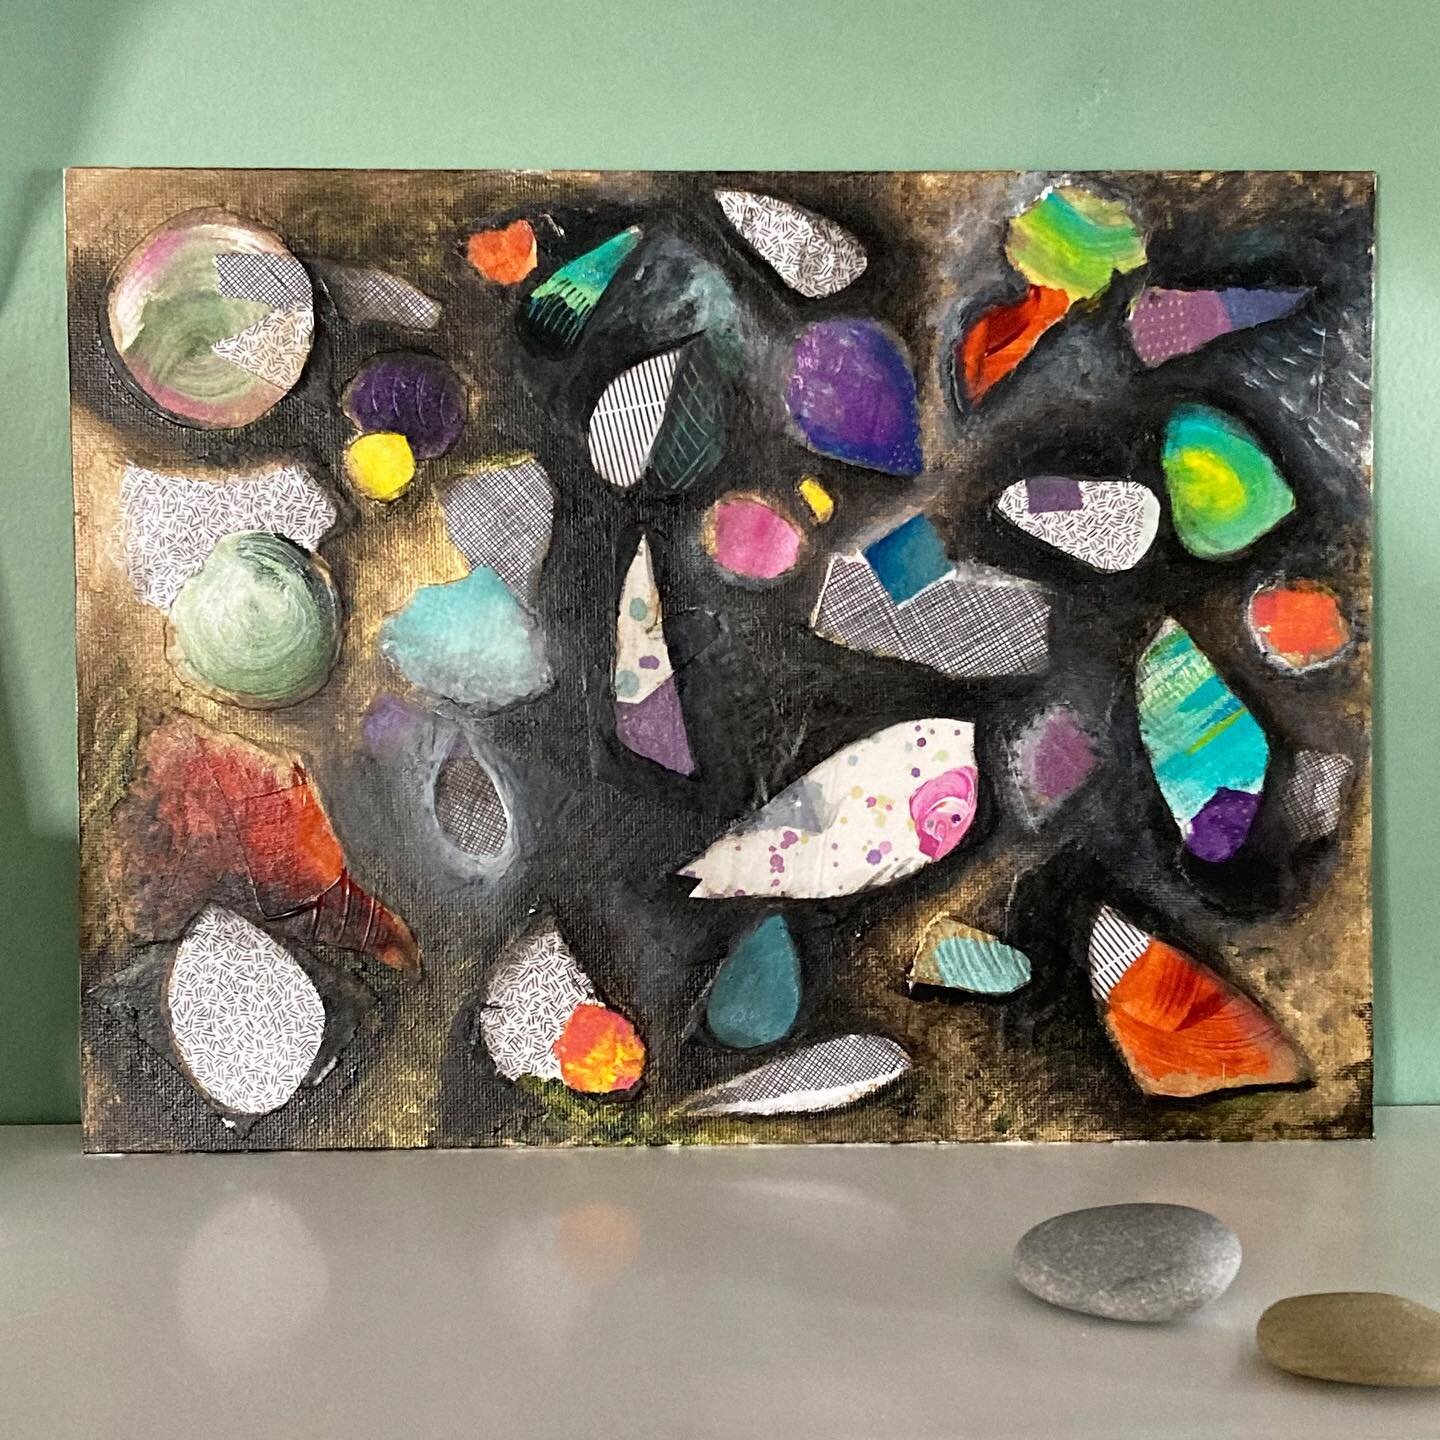 Lately, I&rsquo;ve been experimenting with intuitive painting and different mediums: I named this one &ldquo;We&rsquo;re cocoons in time and space&rdquo; or simply &ldquo;Becoming.&rdquo; It&rsquo;s a collage and painted with acrylics on canvas board